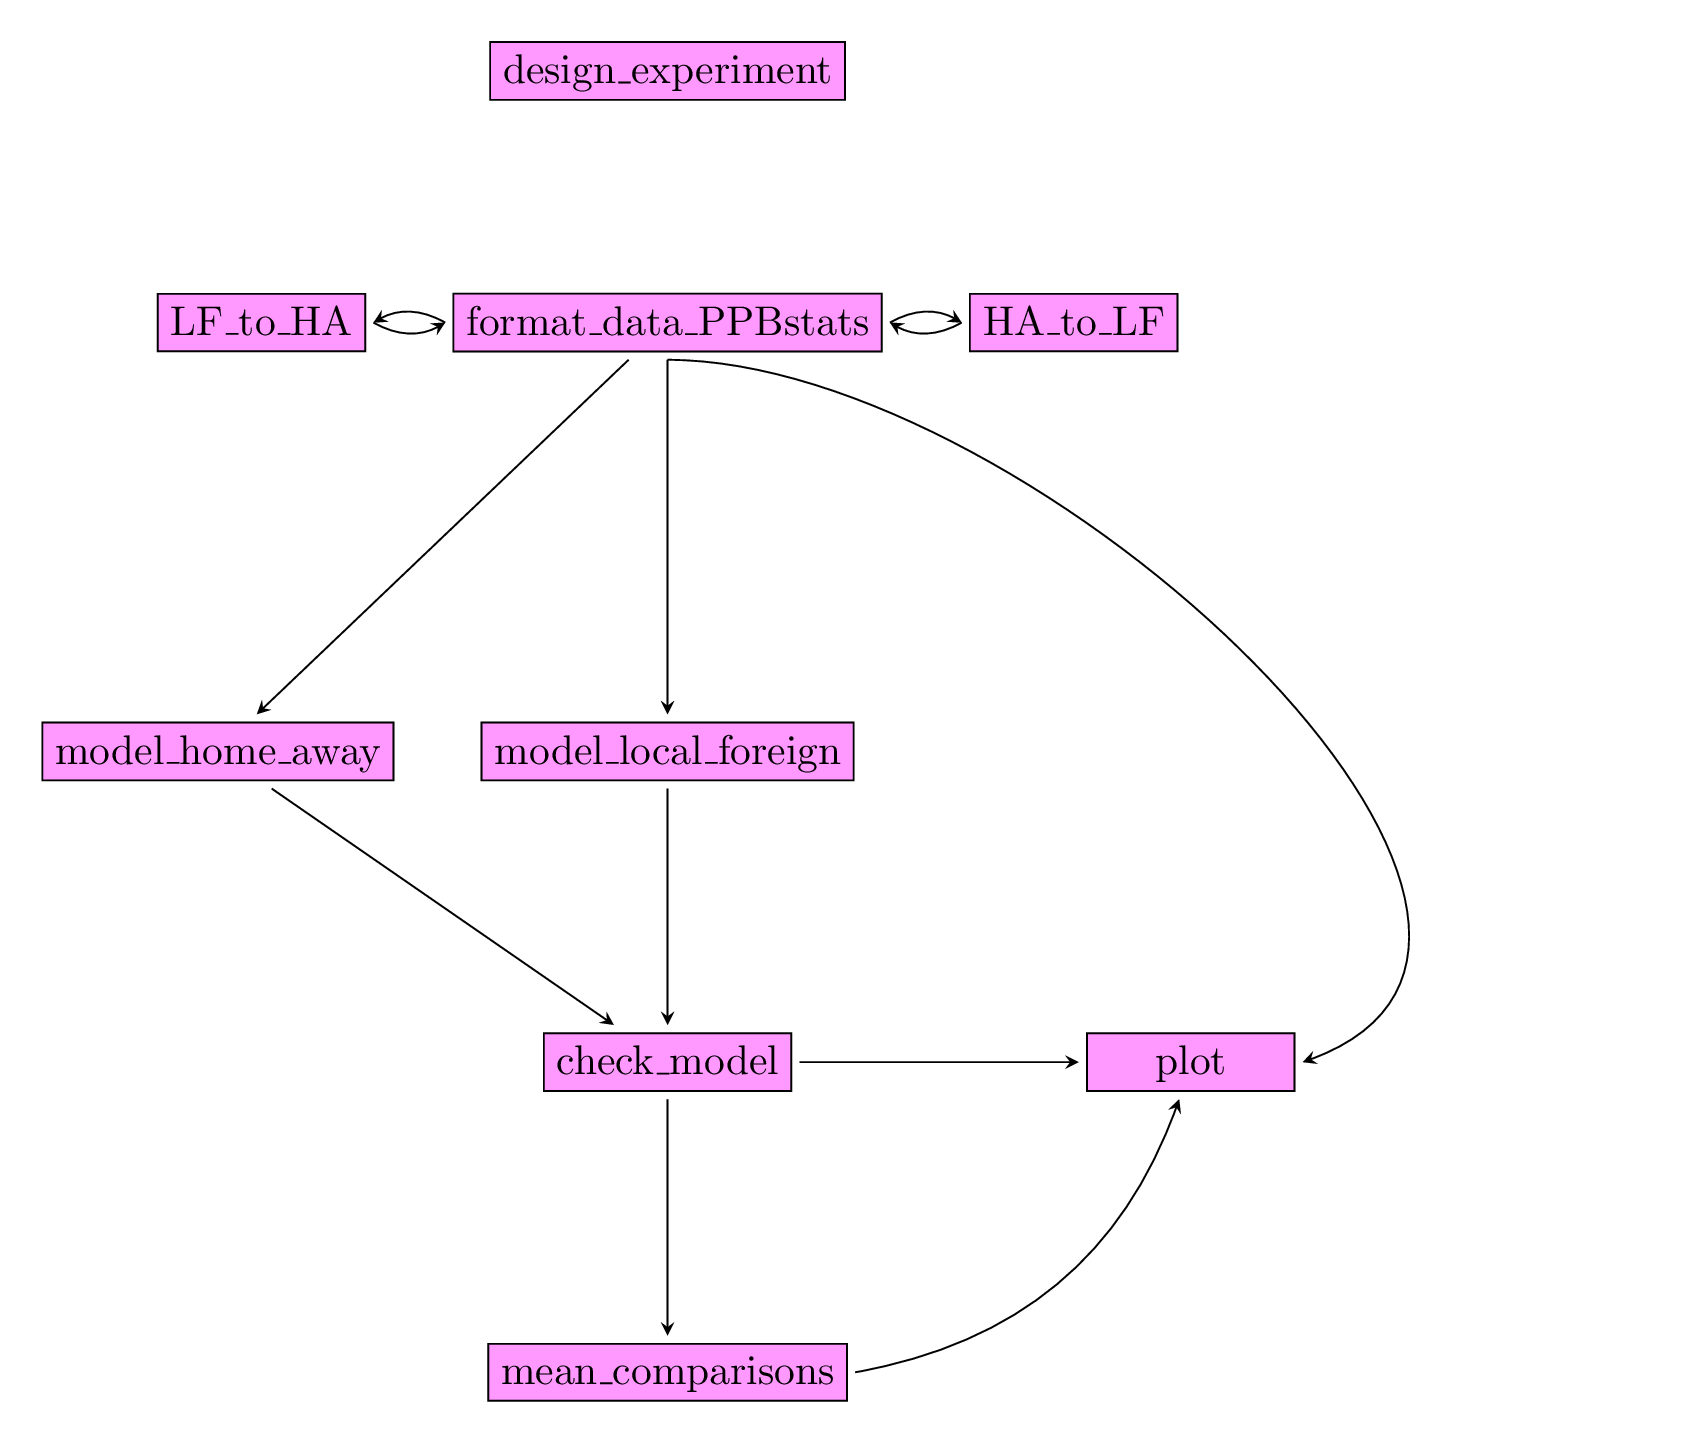 Main functions used in the workflow to study local adaptation.